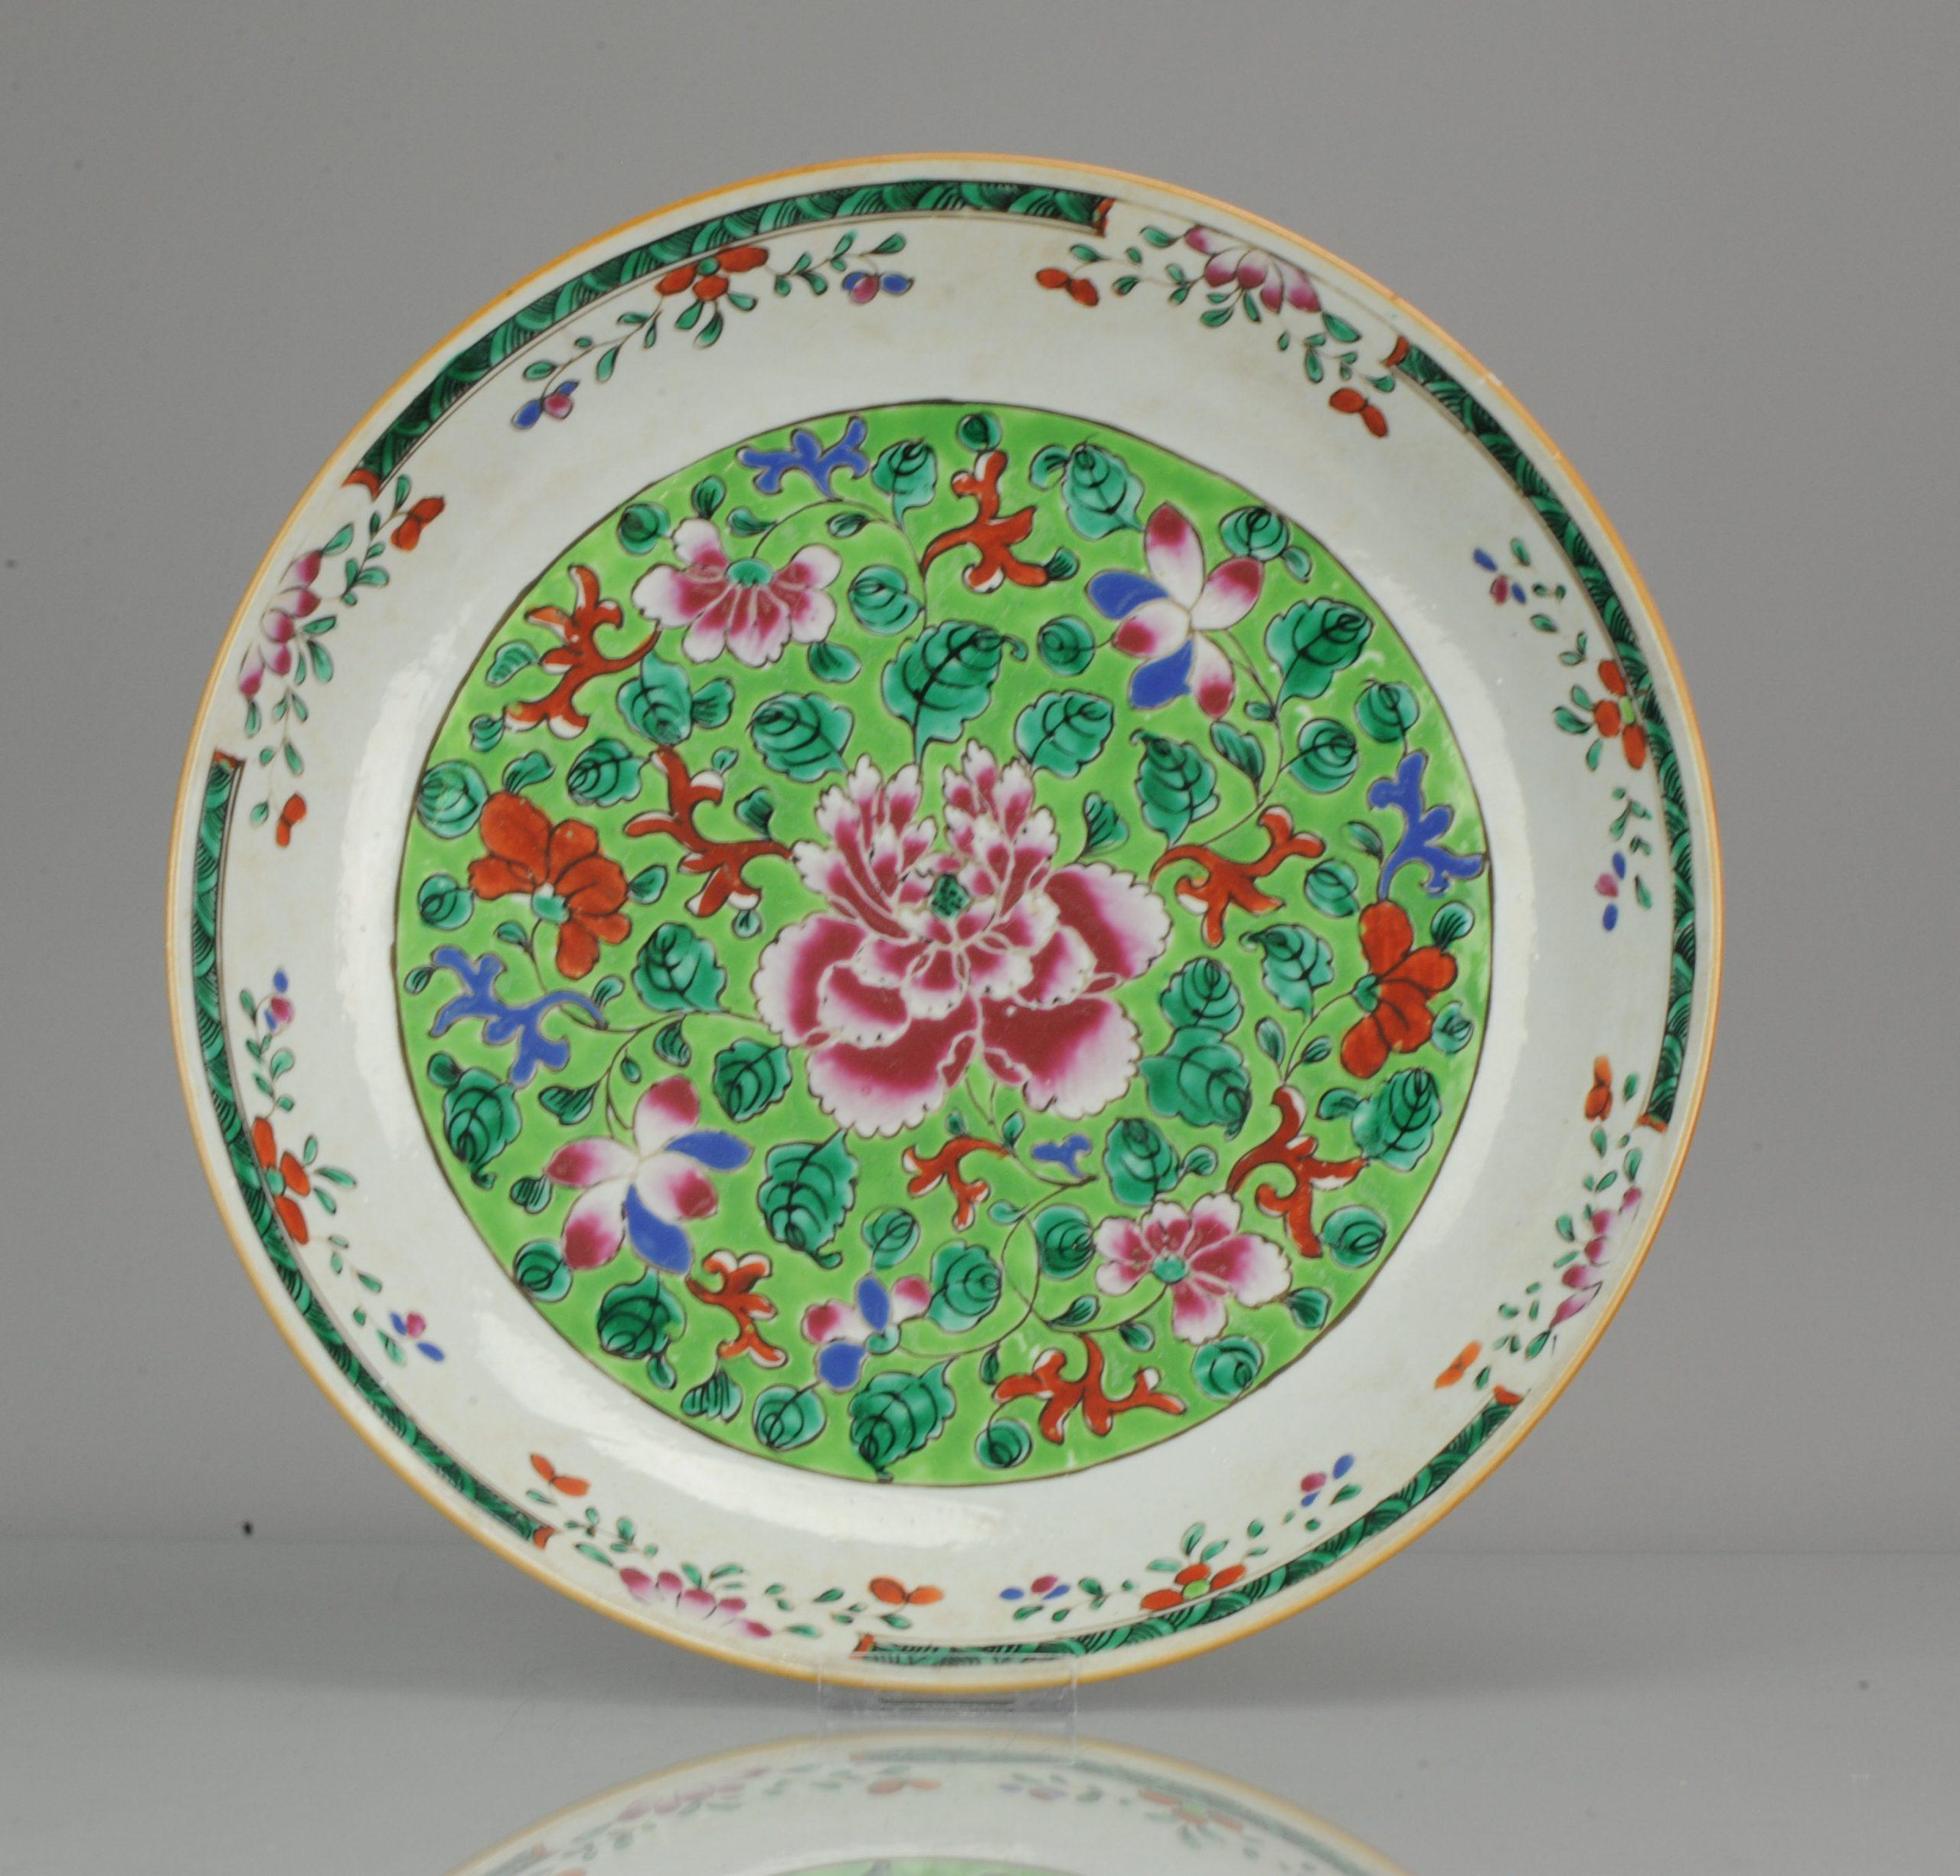 Qing 18th Century Chinese Porcelain Famille Rose Charger Southeast Asia Bencharong